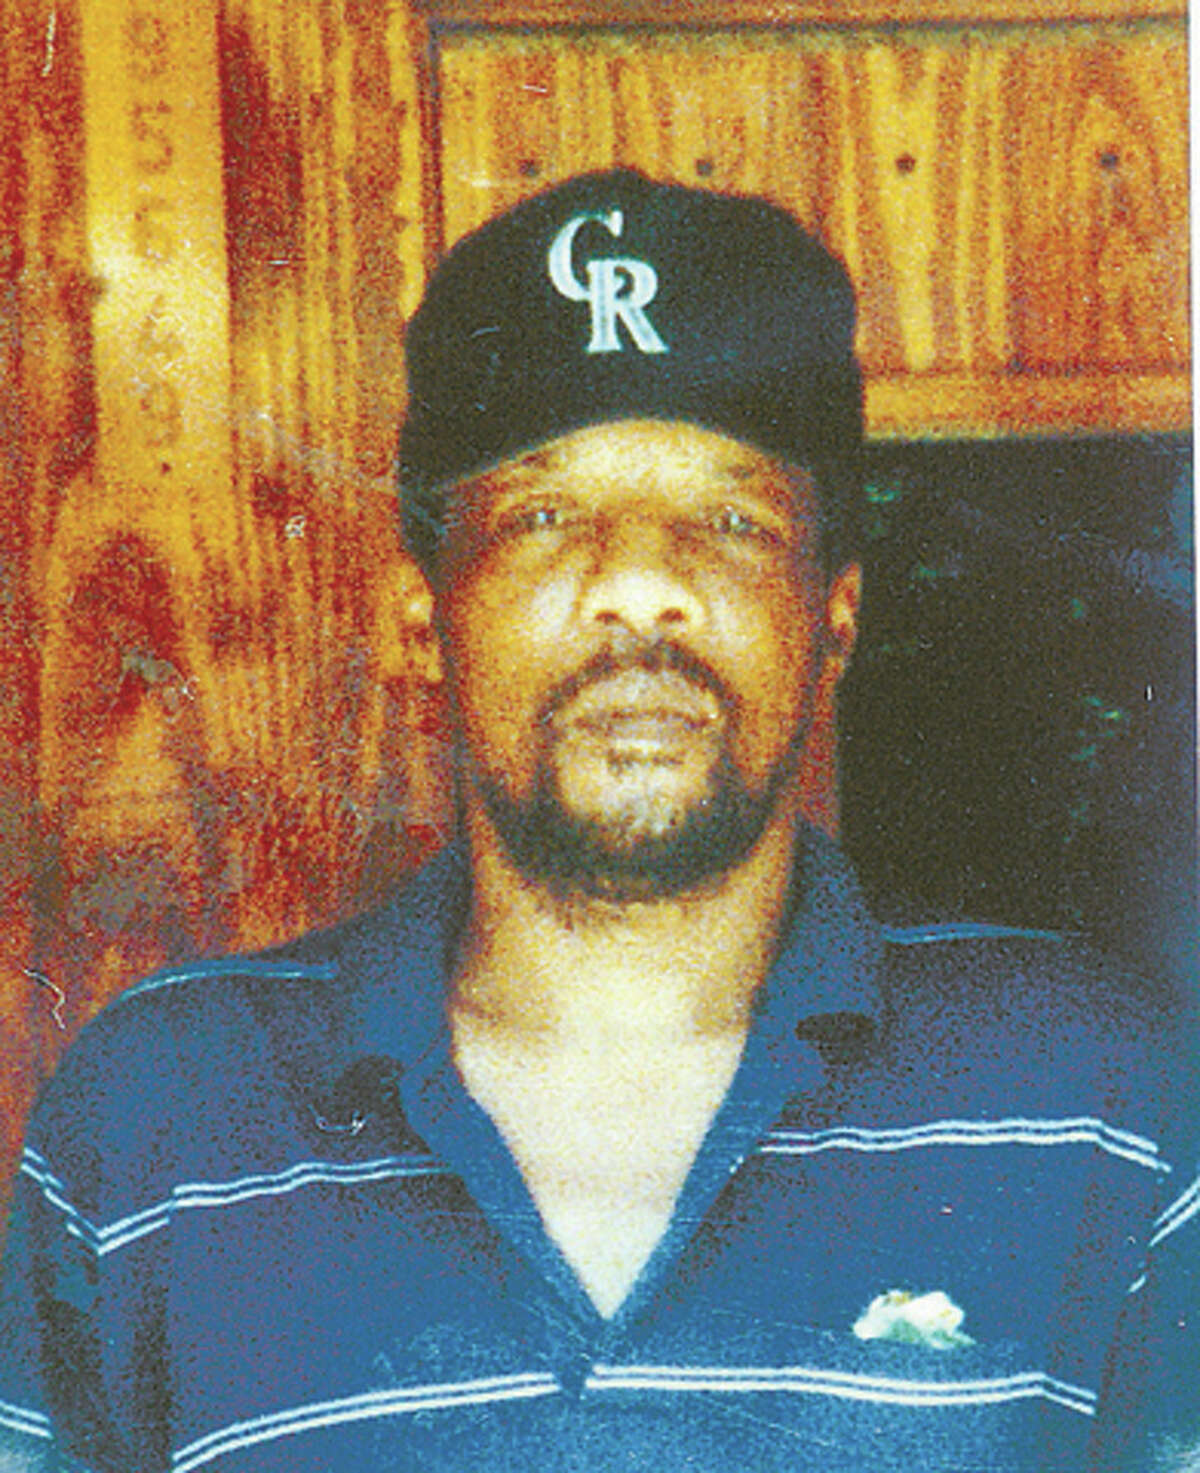 James Byrd Jr. was chained behind a pickup truck and dragged to death in Jasper in 1998. File photo